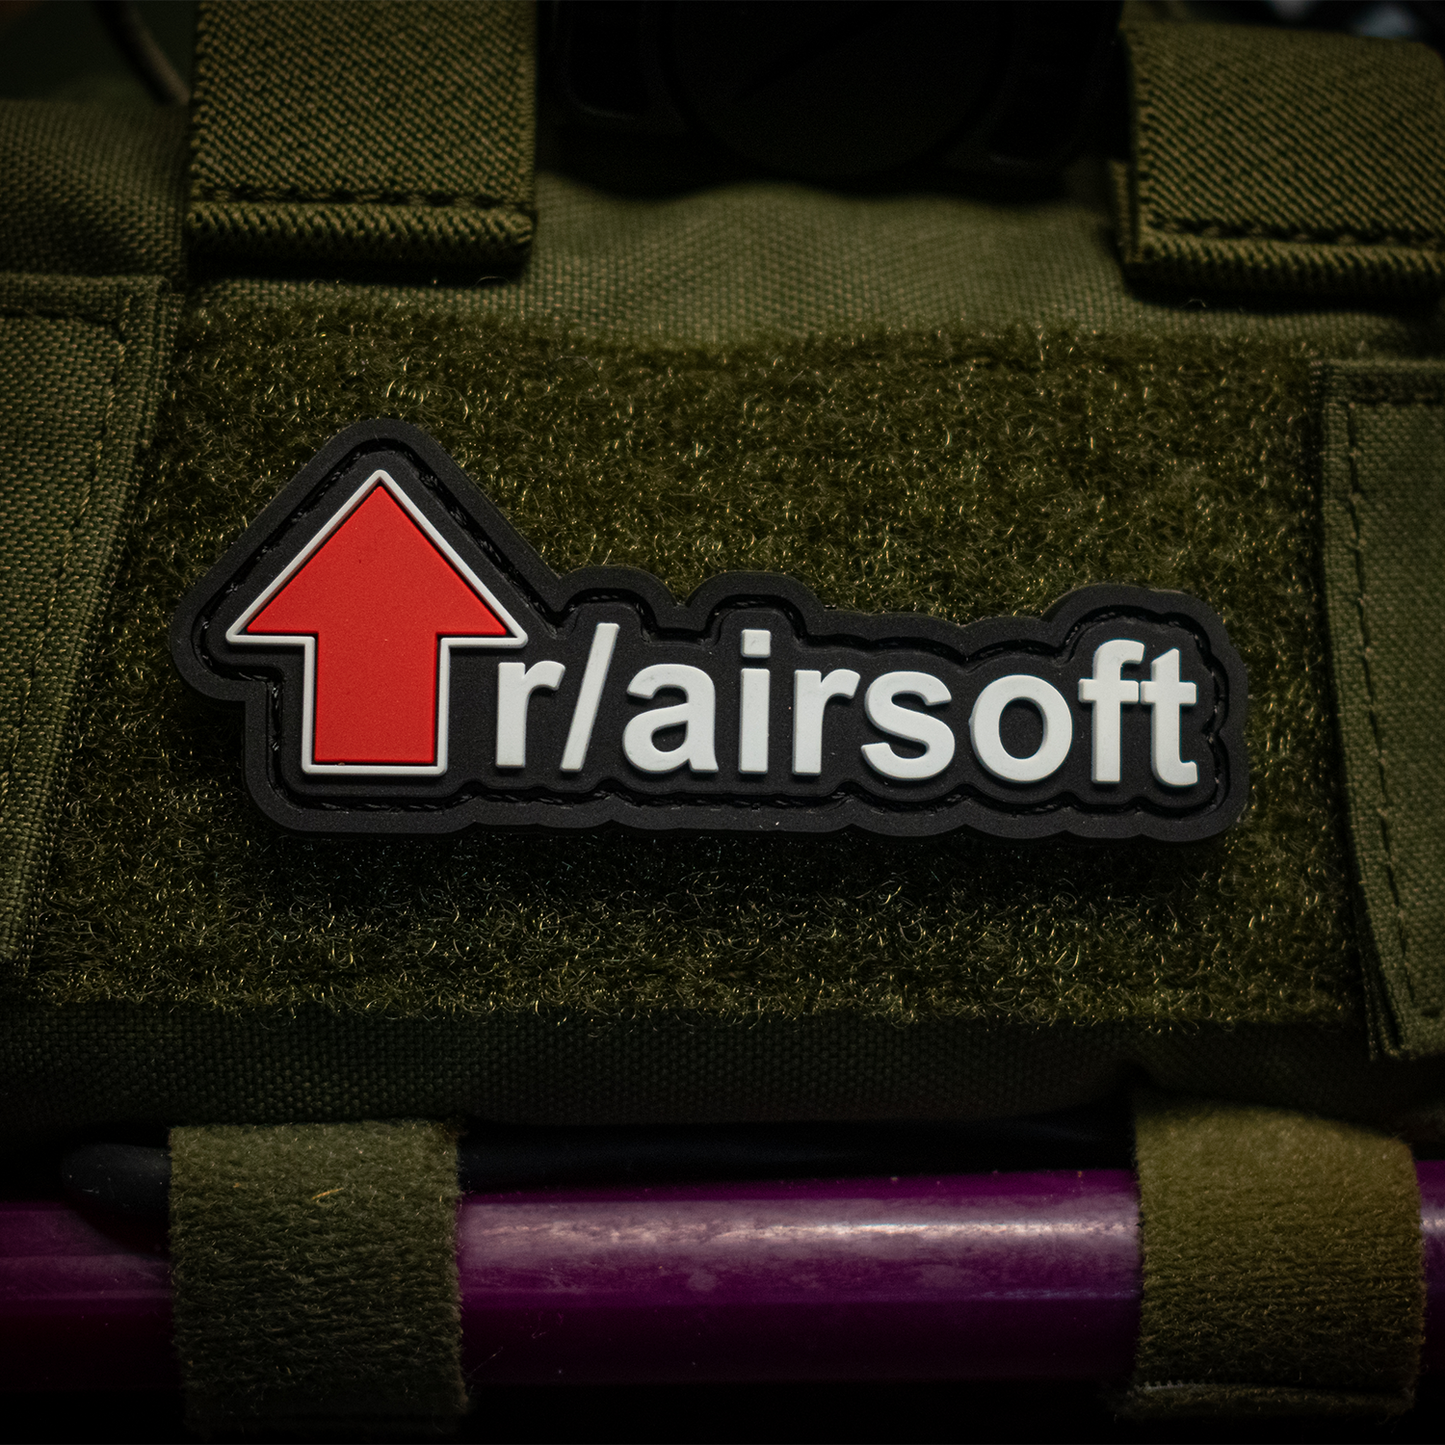 r/airsoft Patch